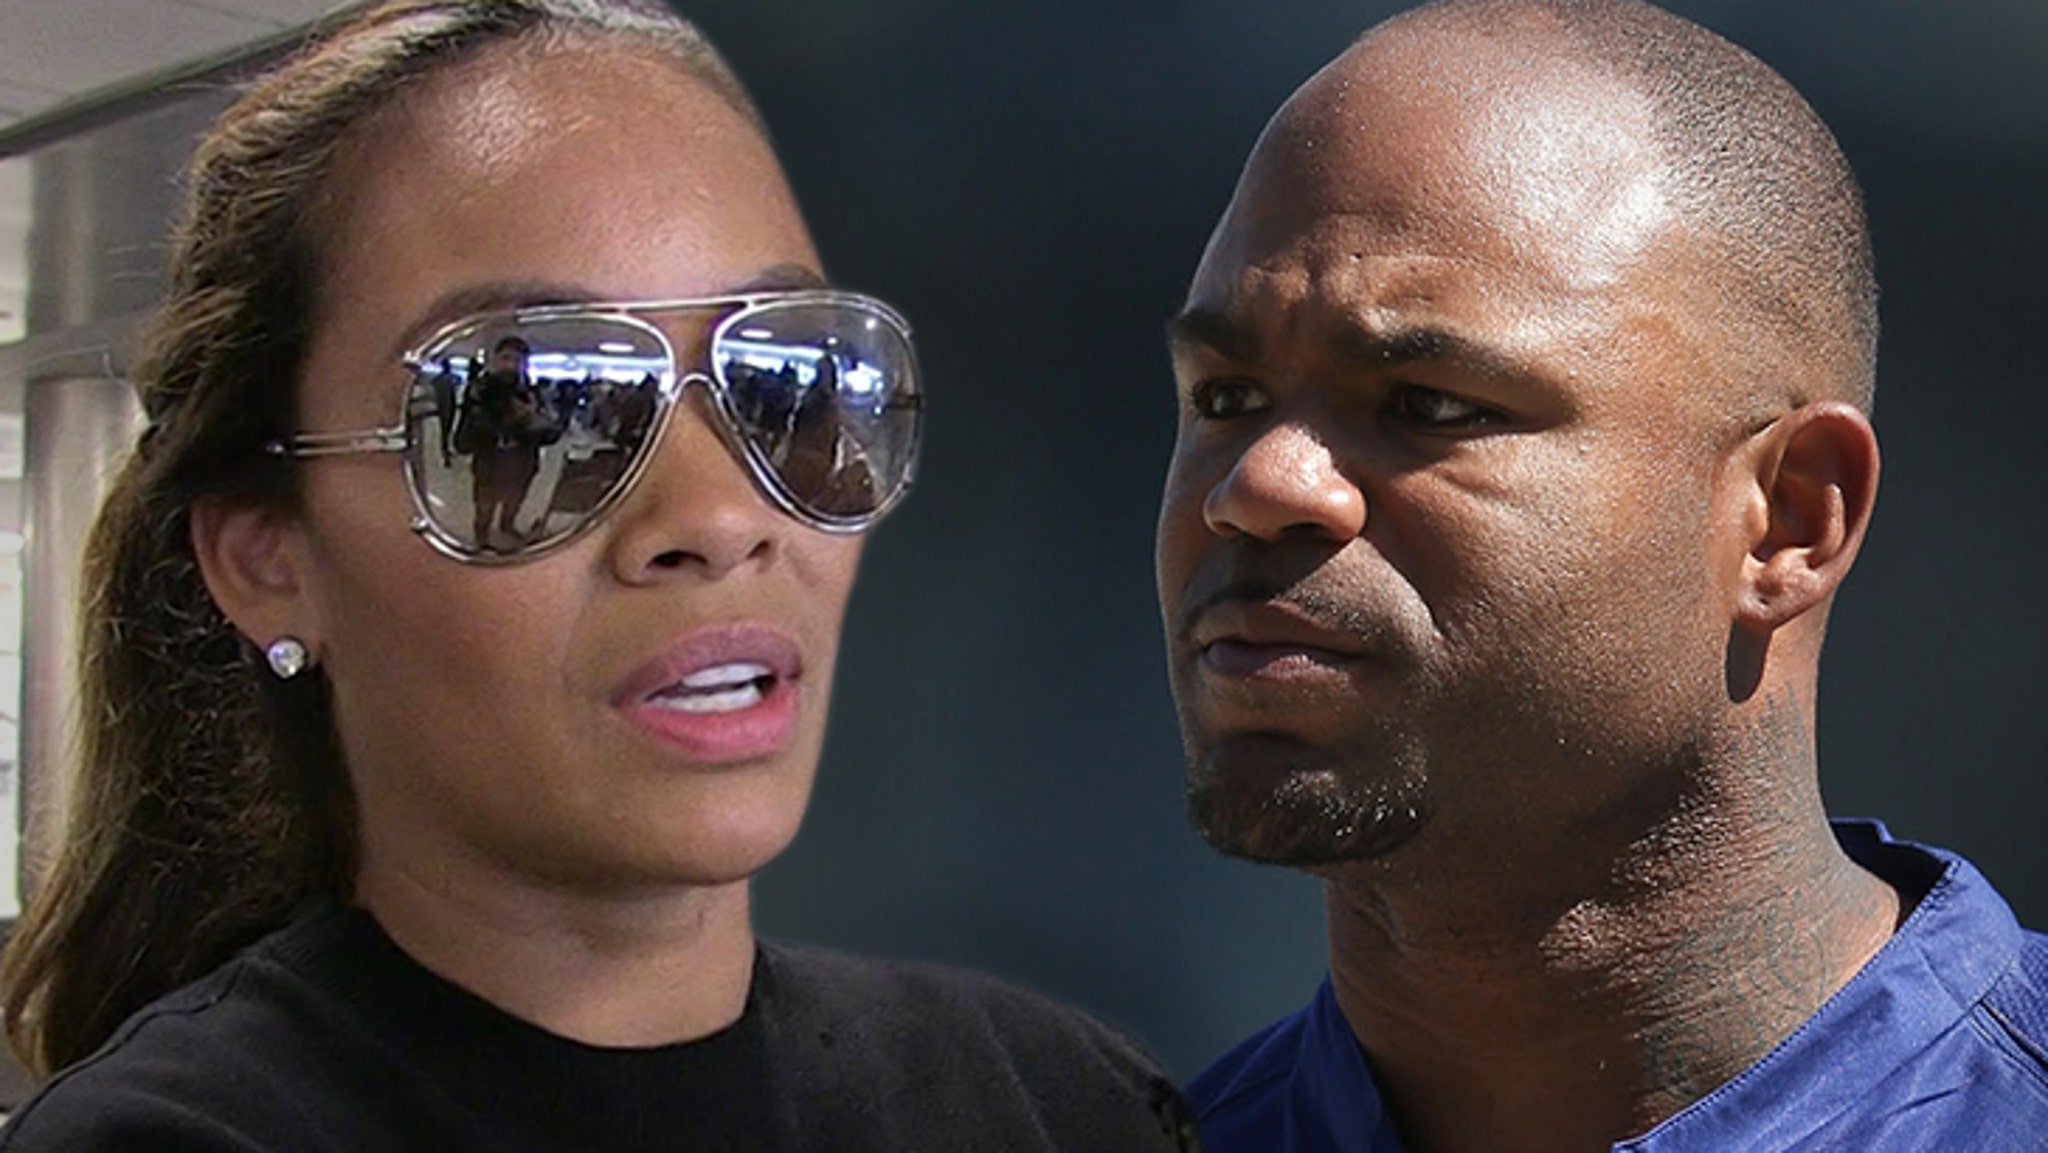 Basketball Wives' Evelyn Lozada and Carl Crawford Have Broken Up